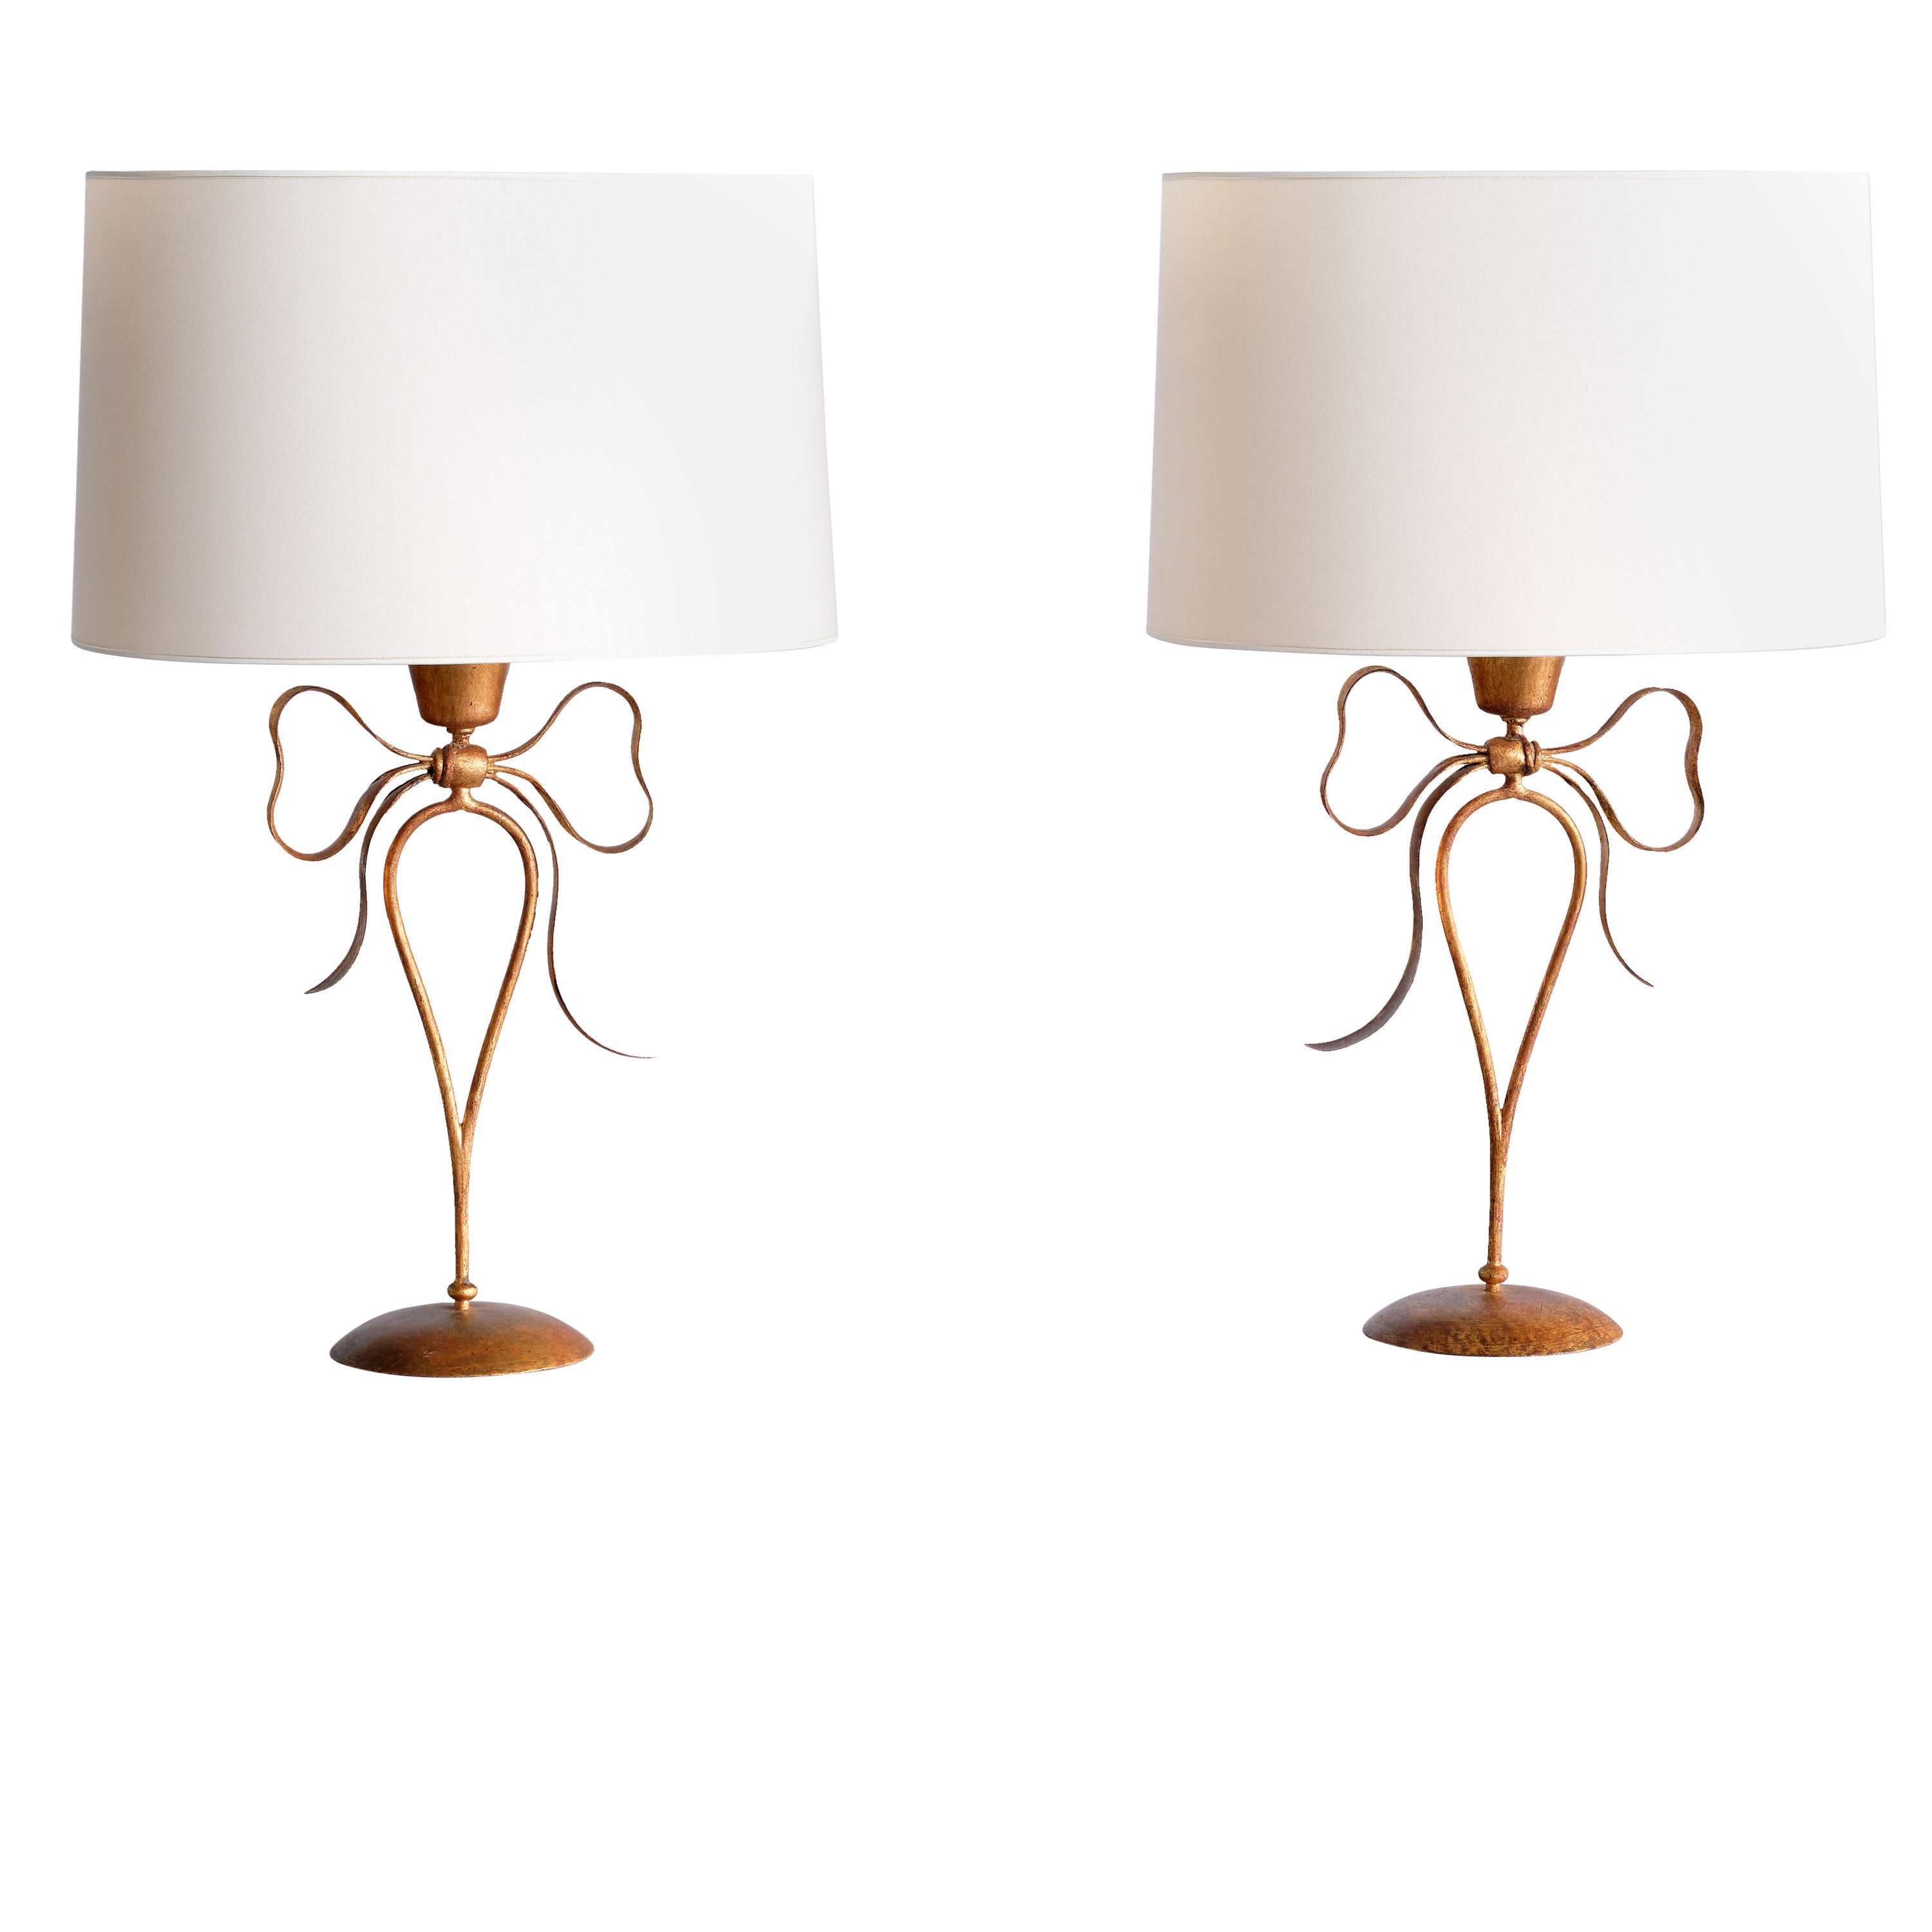 Pair of Gilded Bow Shaped Table Lamps by Mingazzi Bologna, Italy, 1950s